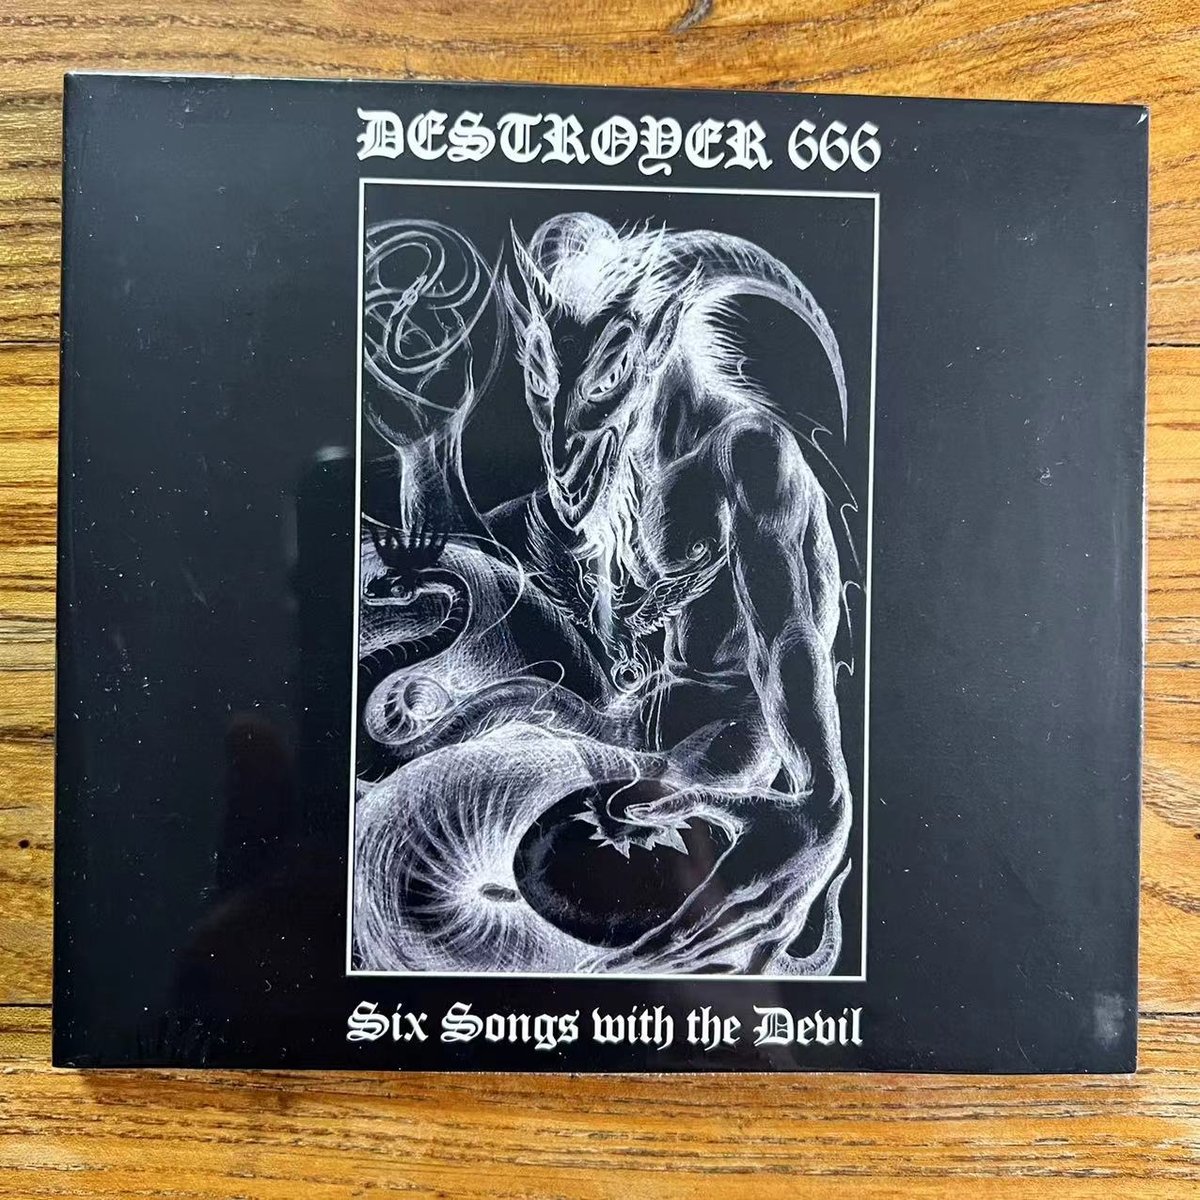 SDLXXX Destroyer 666 (Aus) - Six Songs with the Devil - Digipack